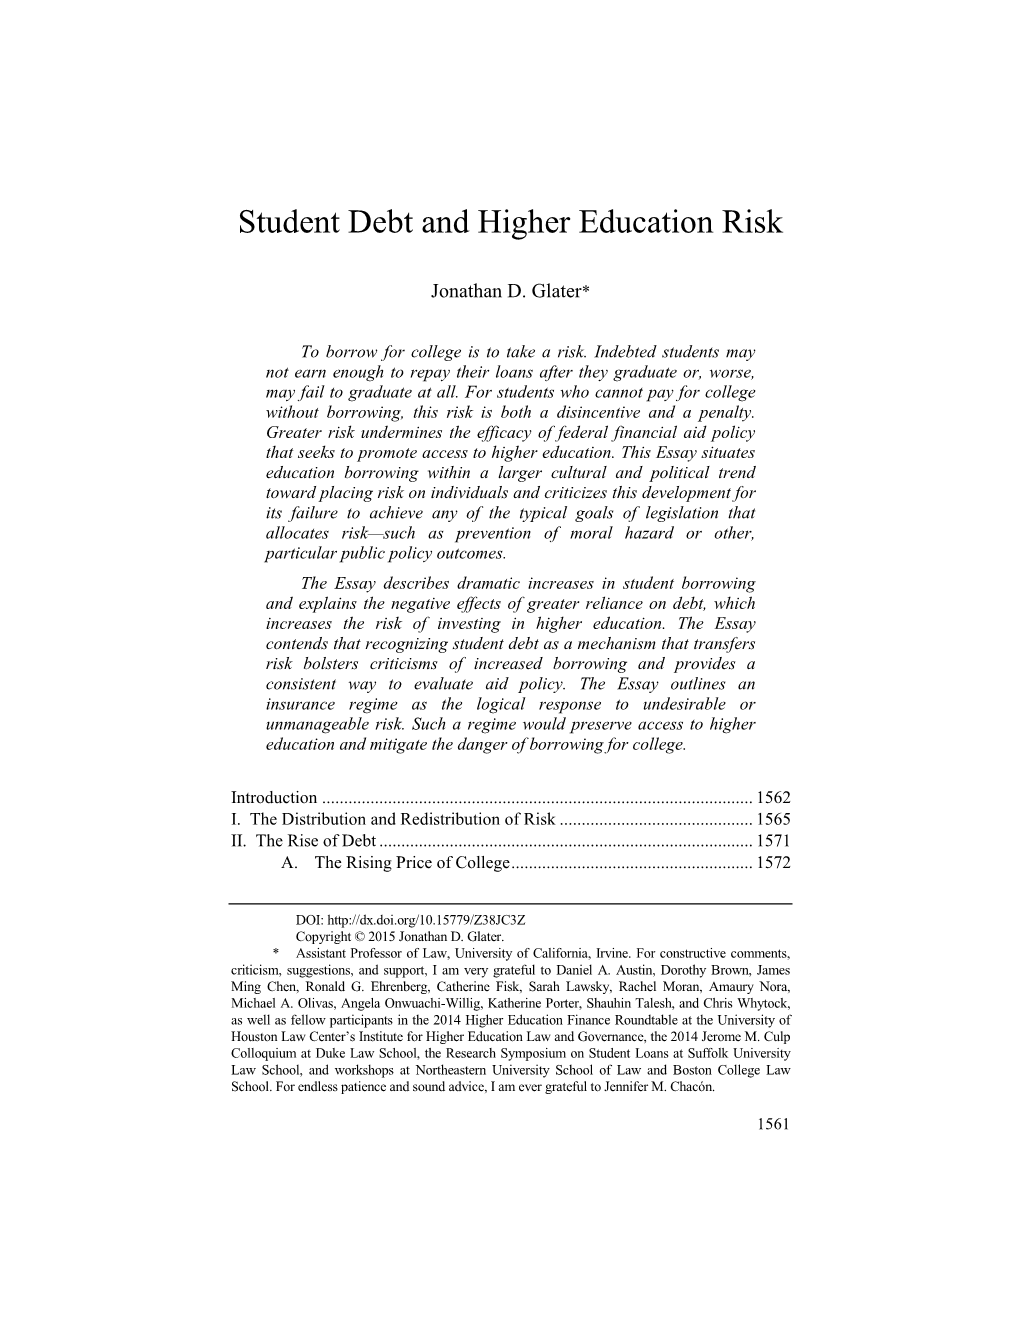 Student Debt and Higher Education Risk